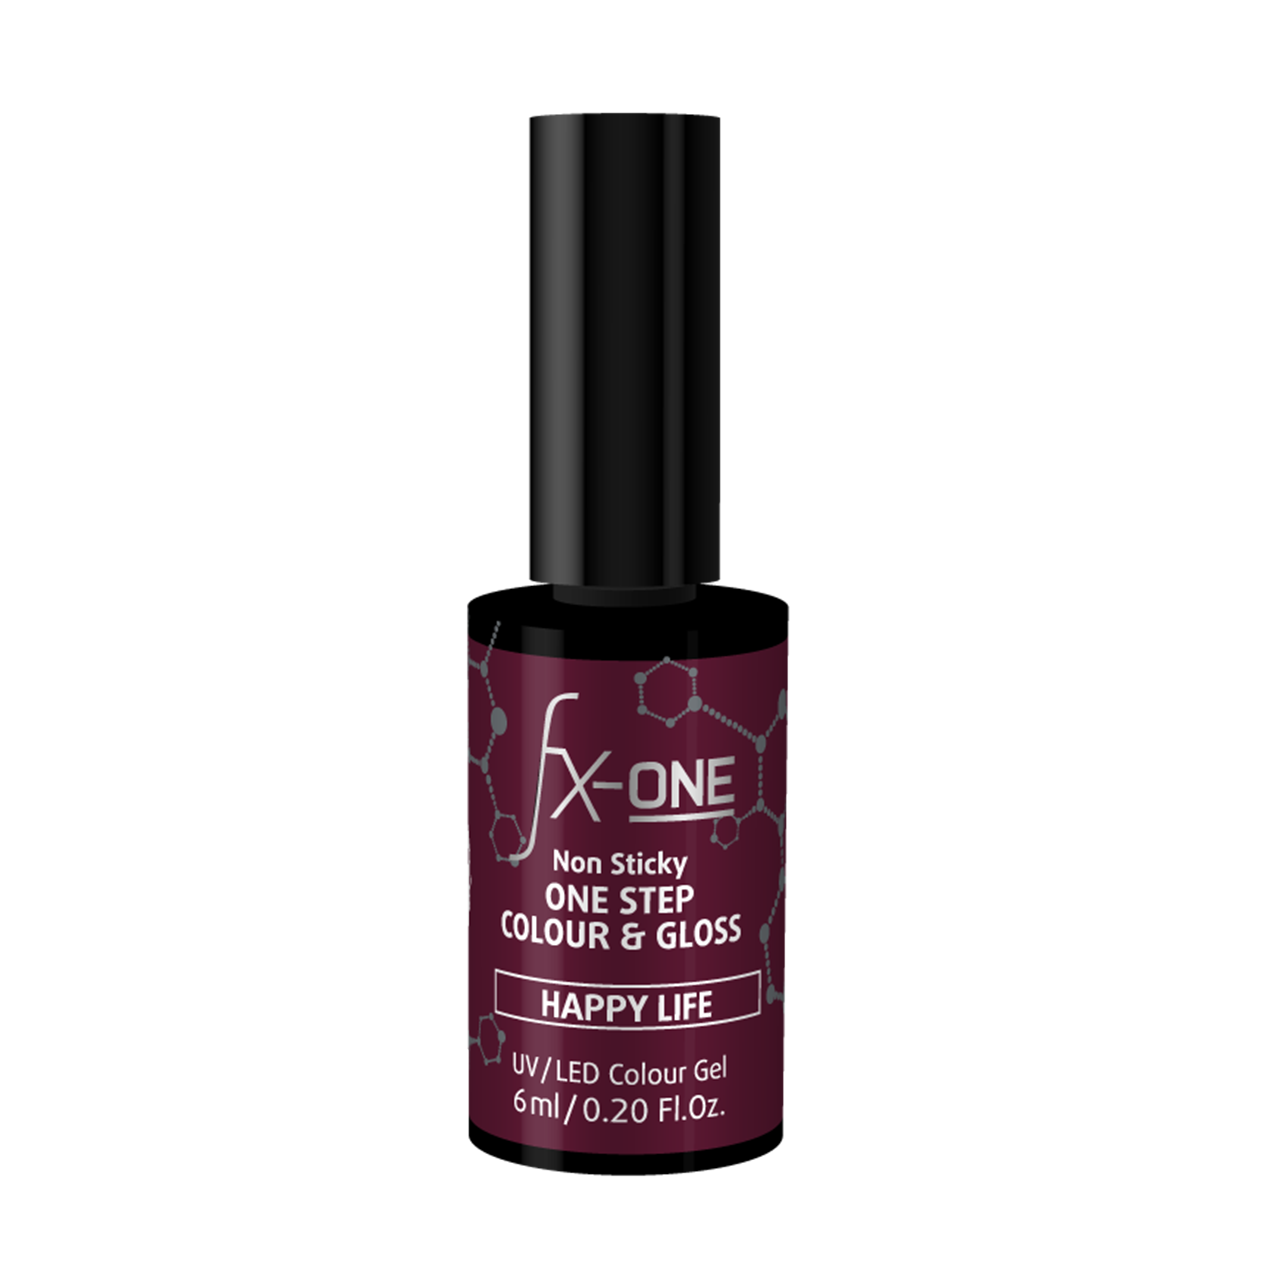 FX-One Colour & Gloss Happy Life